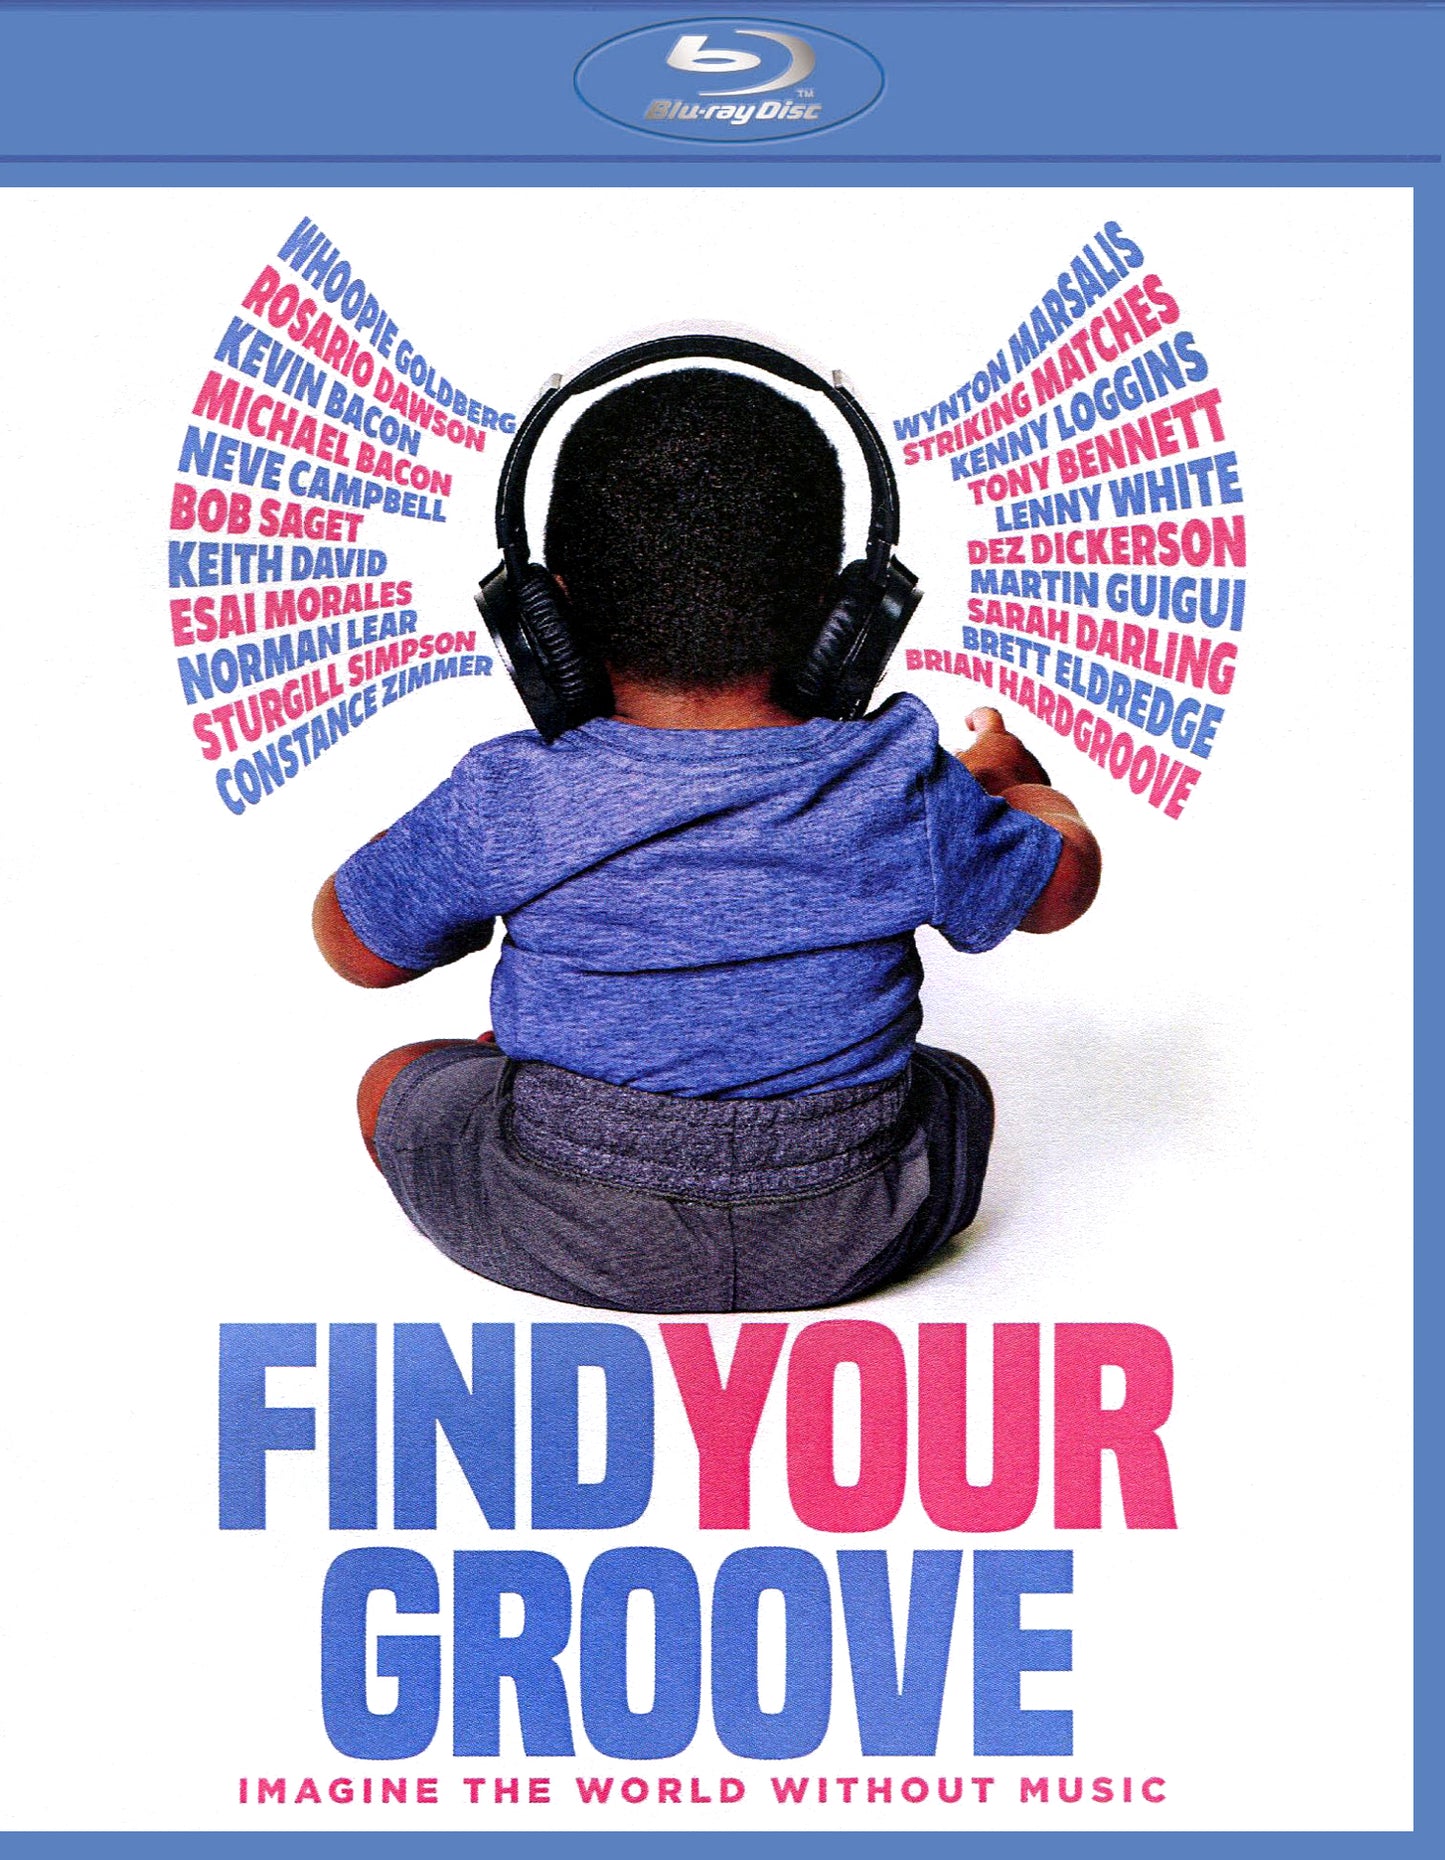 Find Your Groove [Blu-ray] cover art